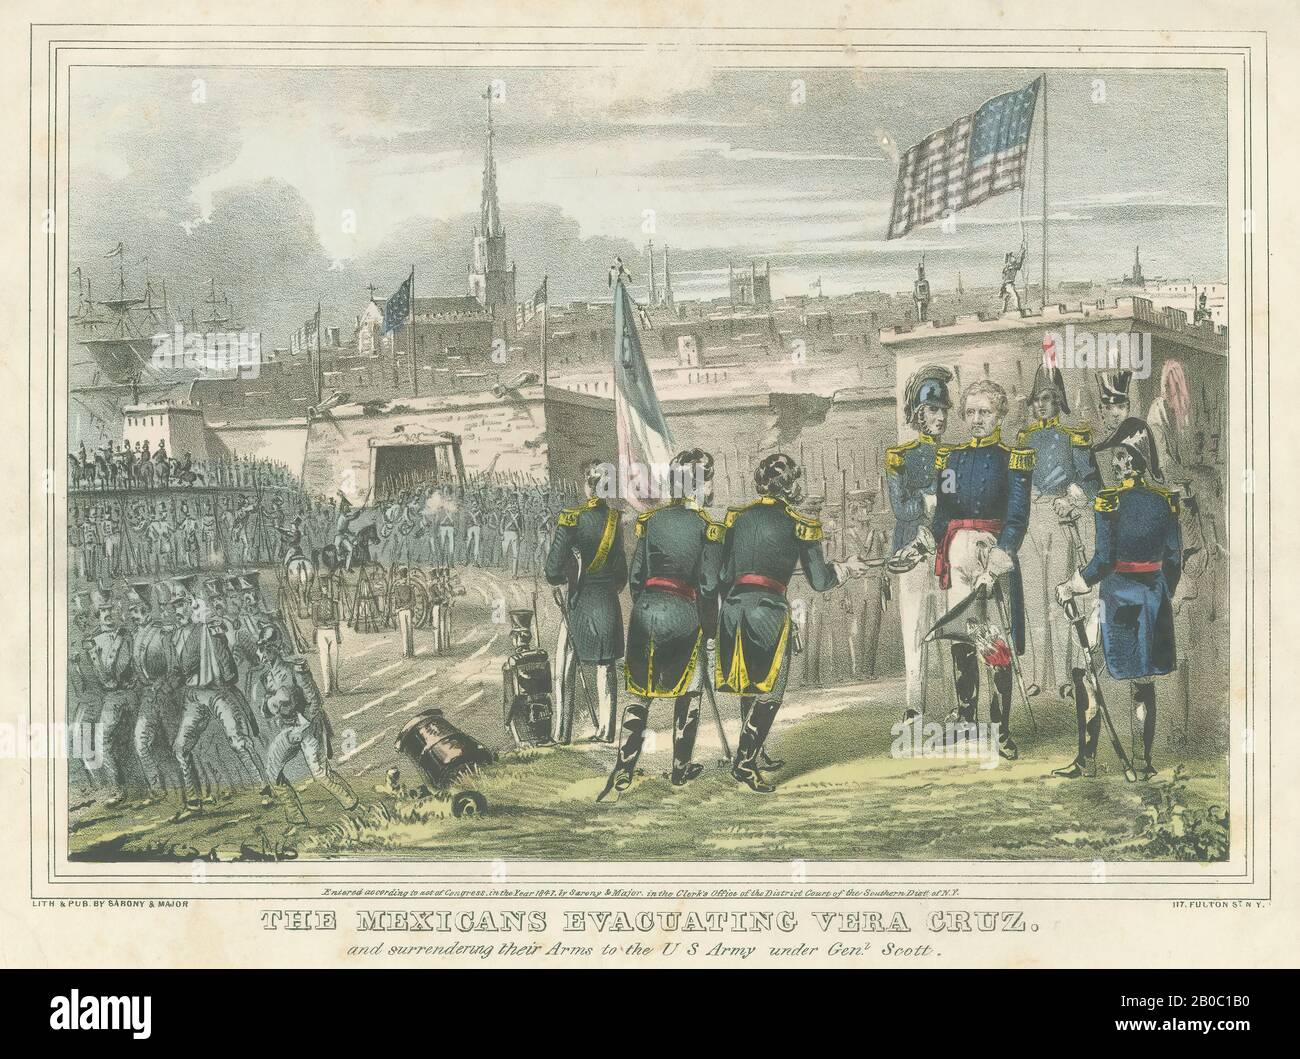 Unknown Artist, Part of a Collection of Mexican-American War Prints, The Mexicans Evacuating Vera CruzAnd Surrendering Their Arms to the U.S. Army, Under General Scott, 1847, color lithograph on paper, 11 9/16 in. x 14 3/8 in. (29.37 cm x 36.51 cm Stock Photo